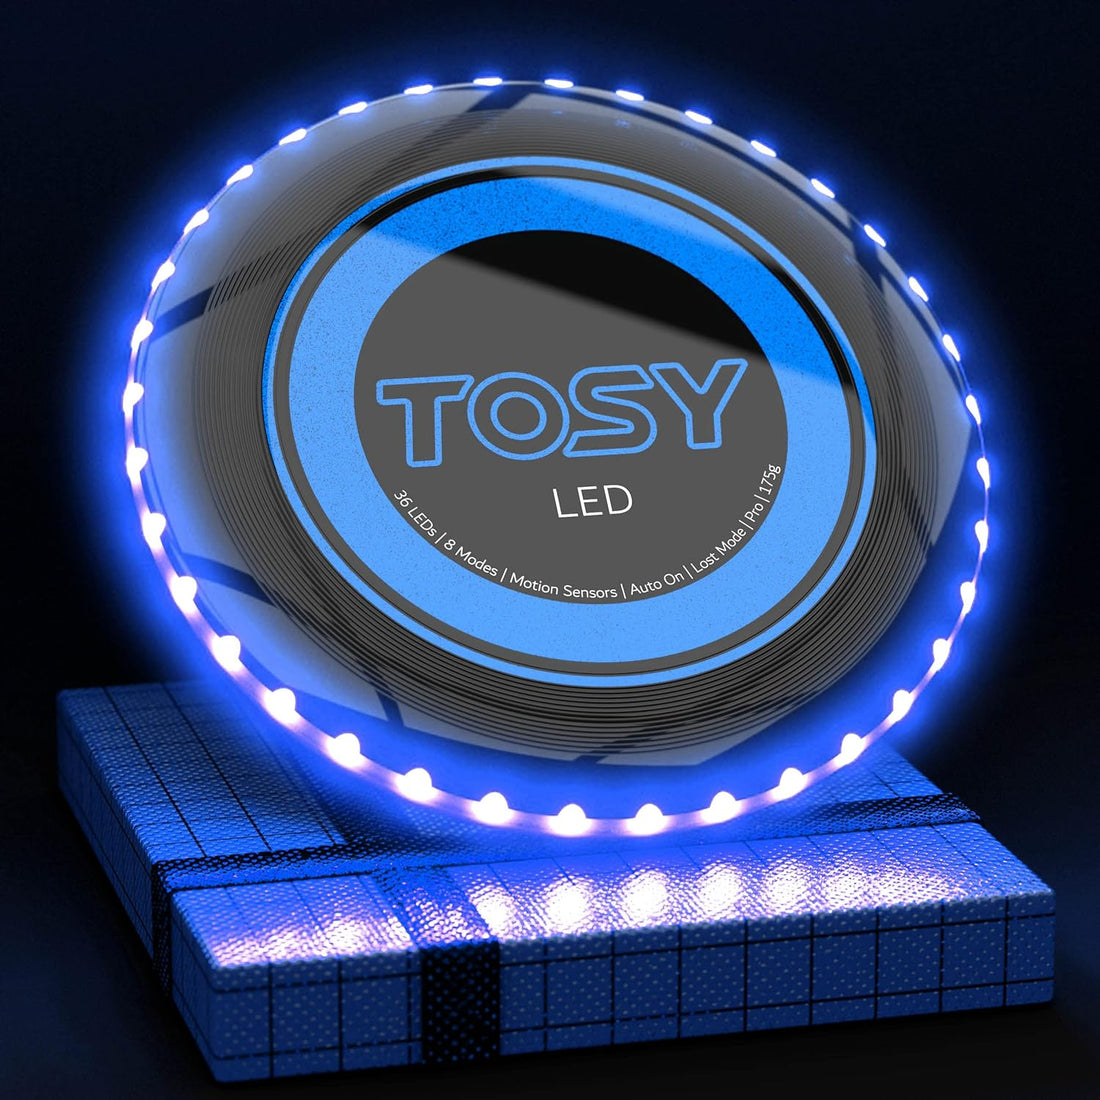 TOSY 36 and 360 LEDs Flying Disc - Extremely Bright, Smart Modes, Glow in The Dark, Auto Light Up, Rechargeable, 175g, Perfect Birthday & Camping Gift for Men/Boys/Teens/Kids